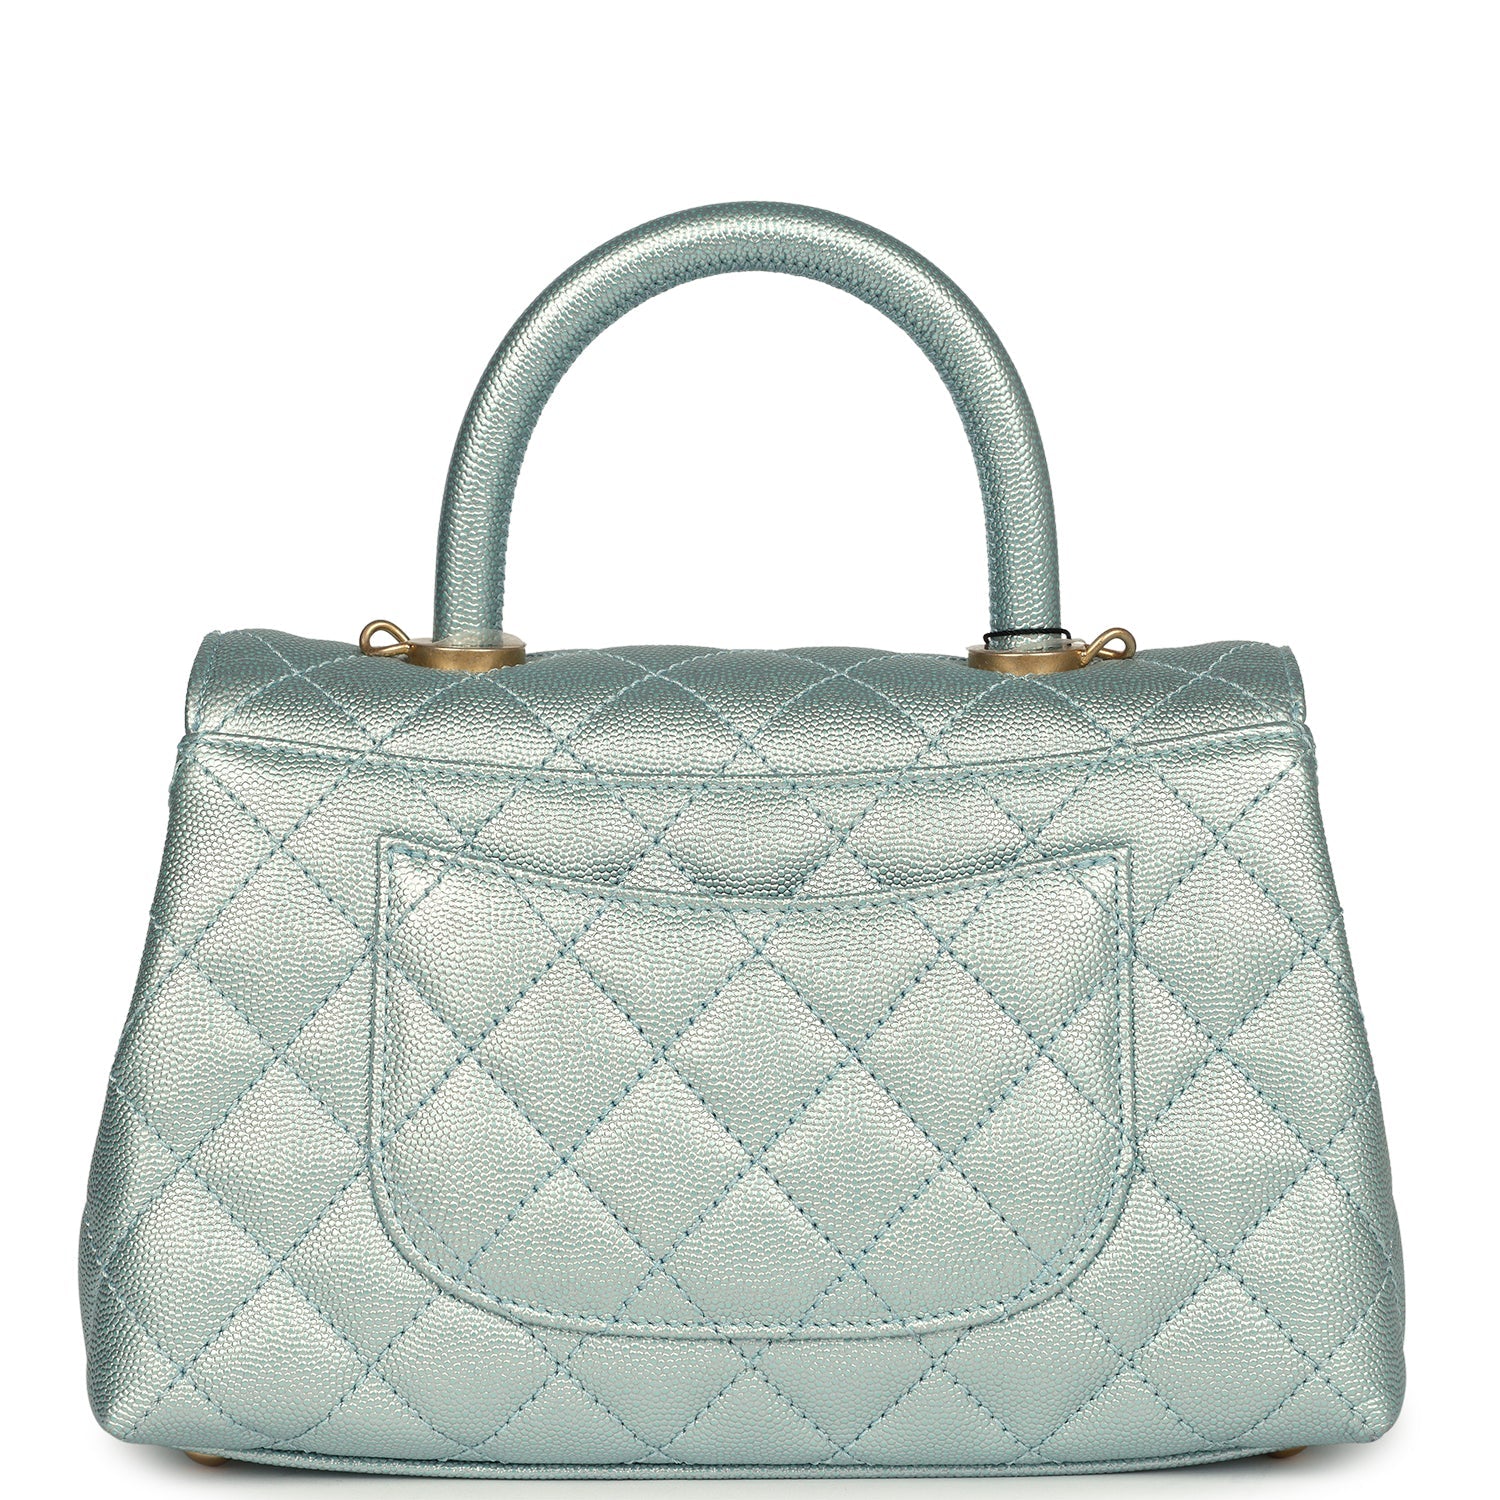 Chanel Small Coco Handle Flap Bag Light Blue Iridescent Caviar Aged Gold Hardware